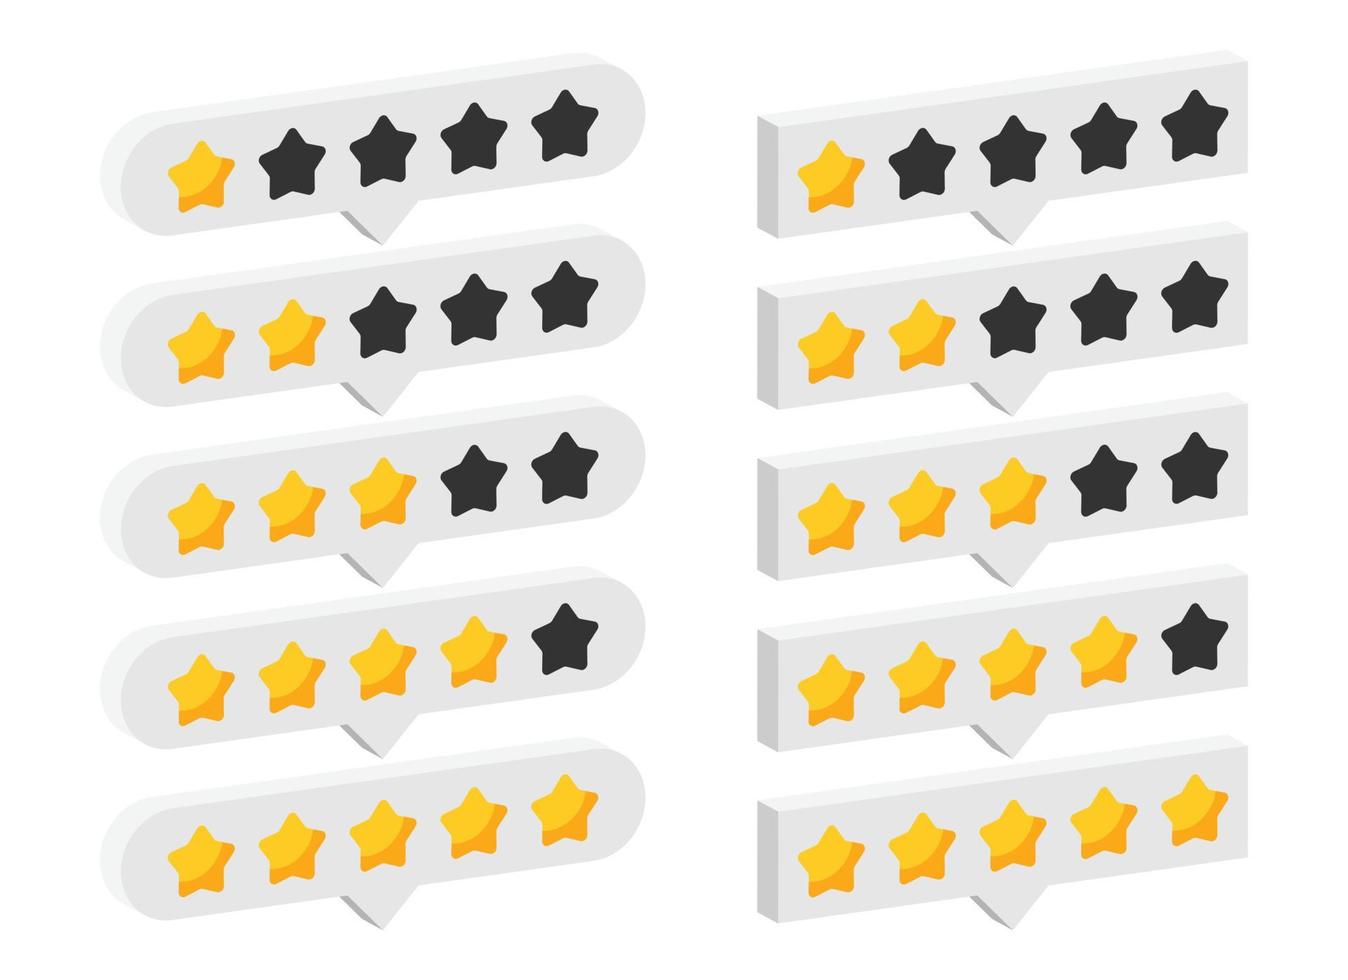 Star rating review from zero to five. Customer feedback 3D vector